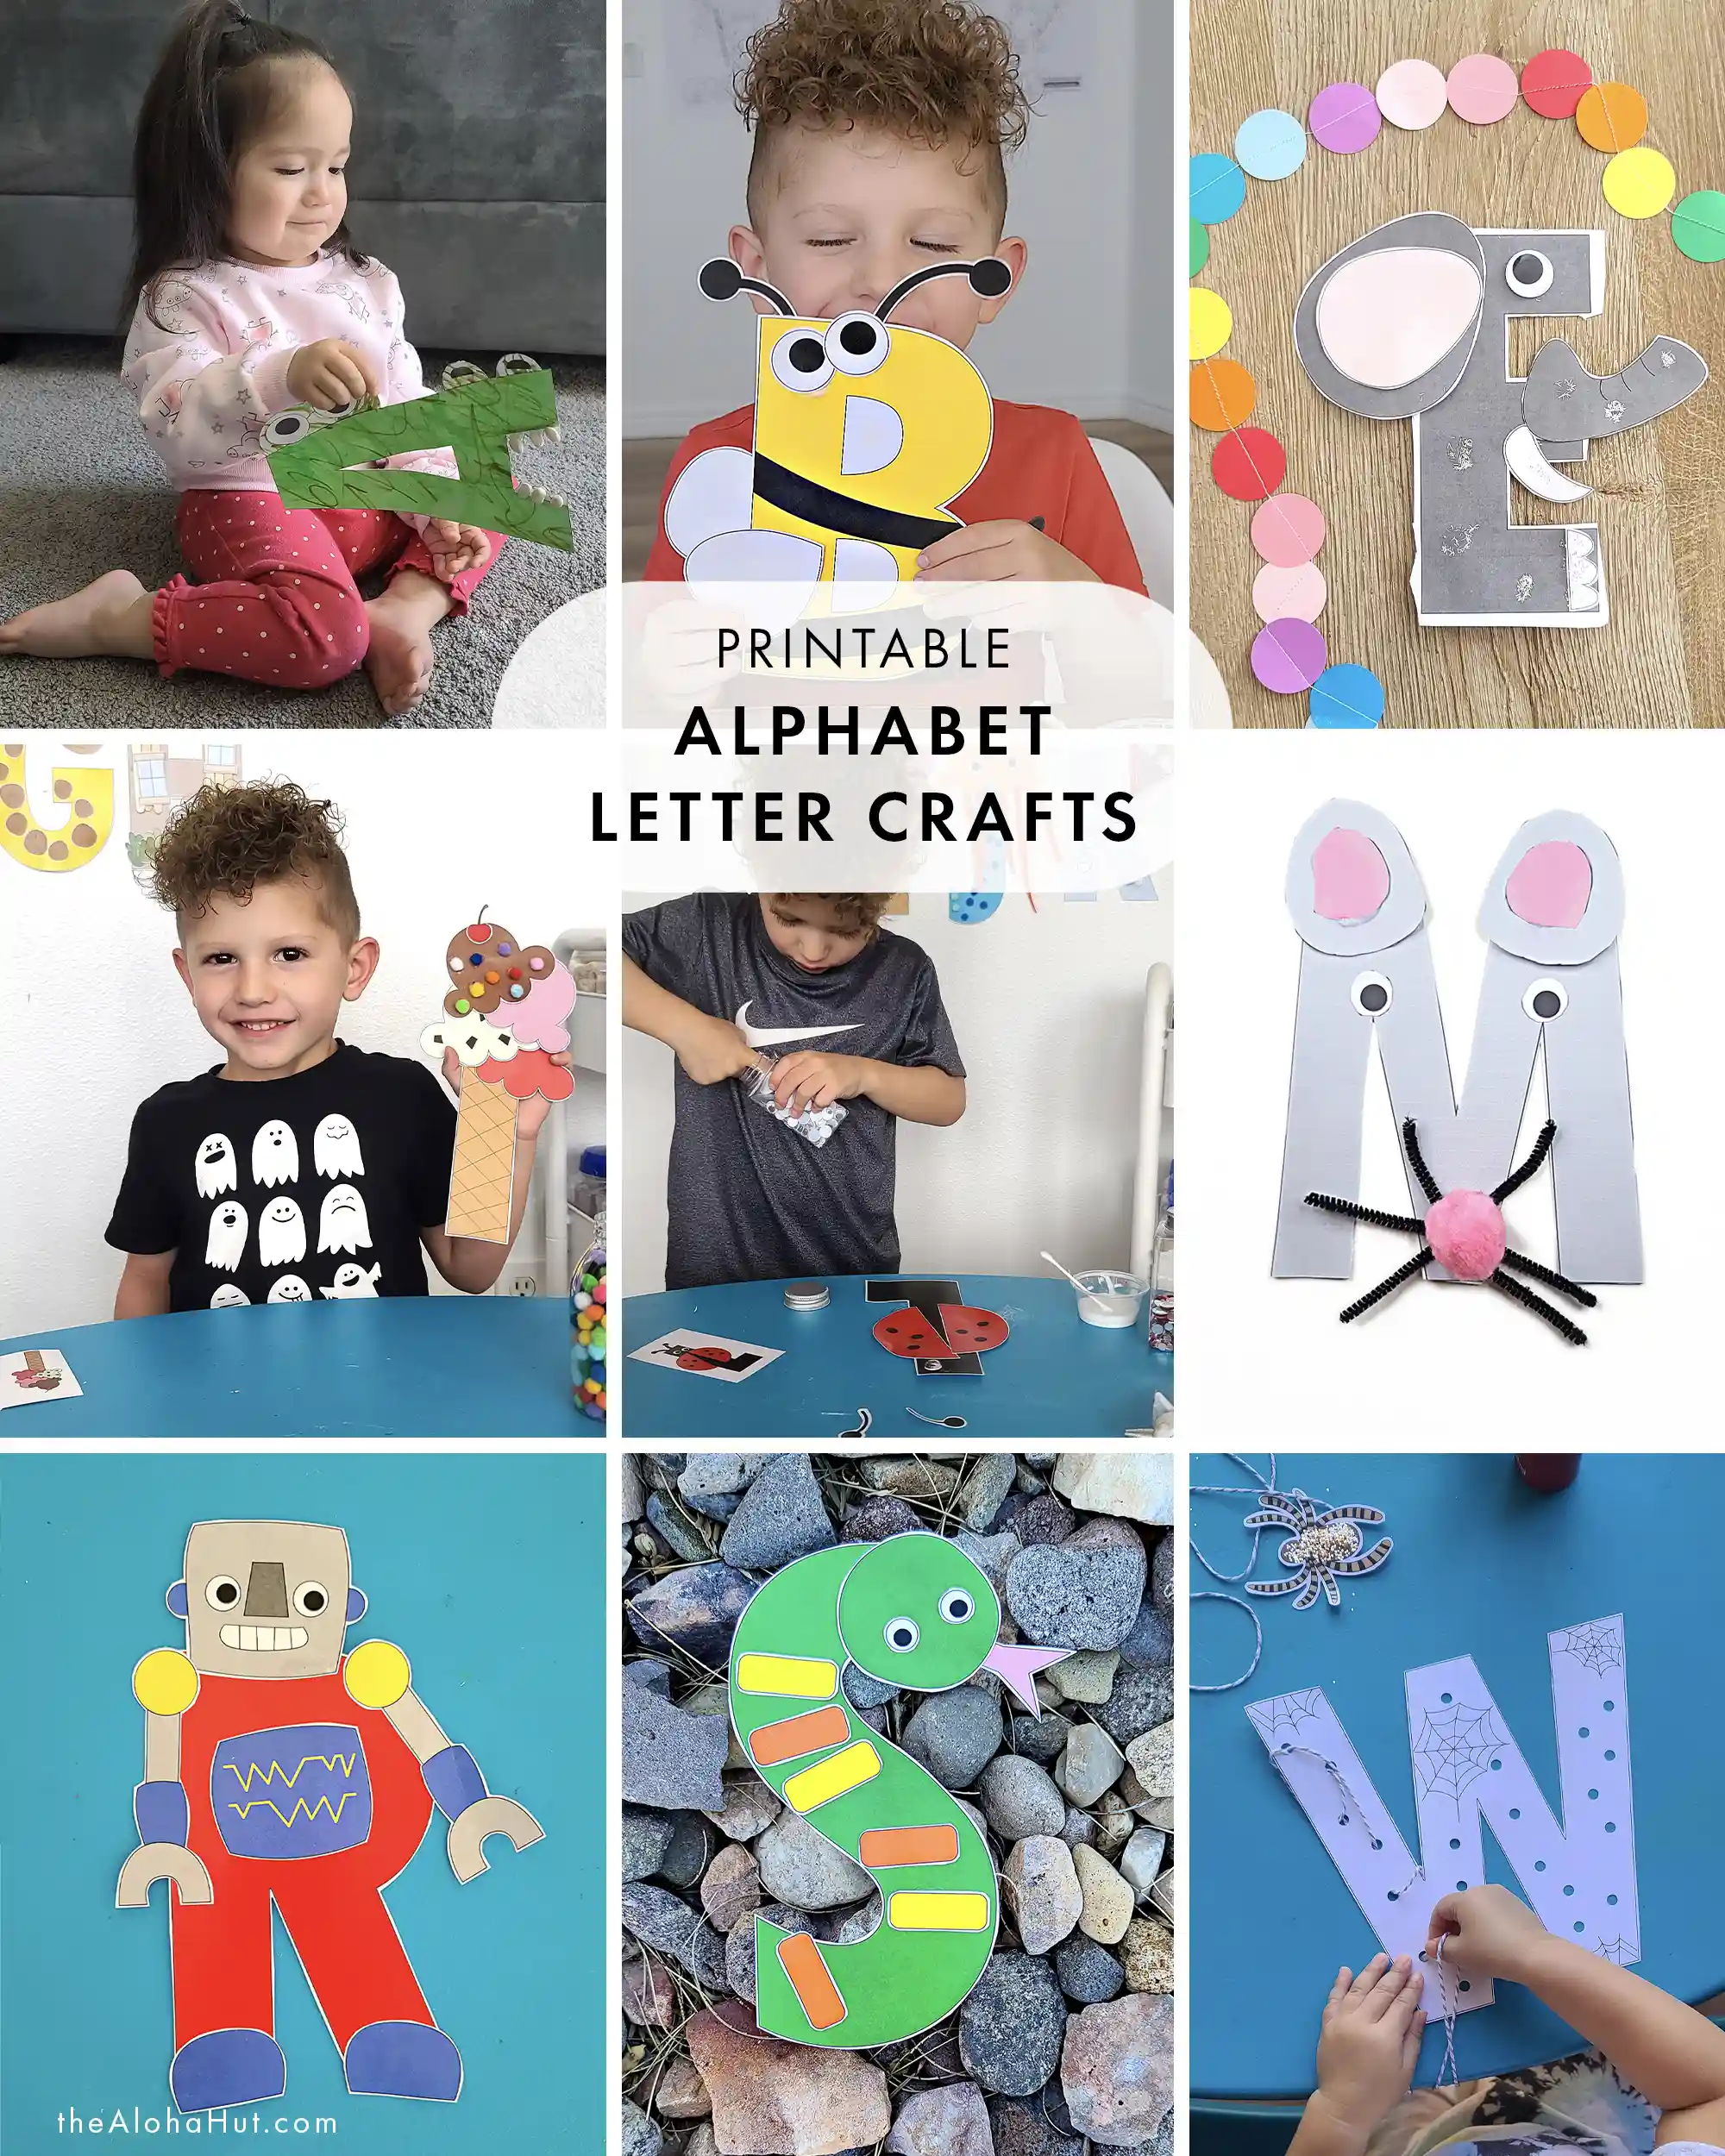 Printable alphabet letter crafts for toddlers and preschool aged kids. Simply print, cut out, and glue together. Or let kids get creative with extra art supplies like glitter, pom poms, leaves, beads, pipe cleaners, etc. This is a fun and easy activity to help kids learn their ABCs.